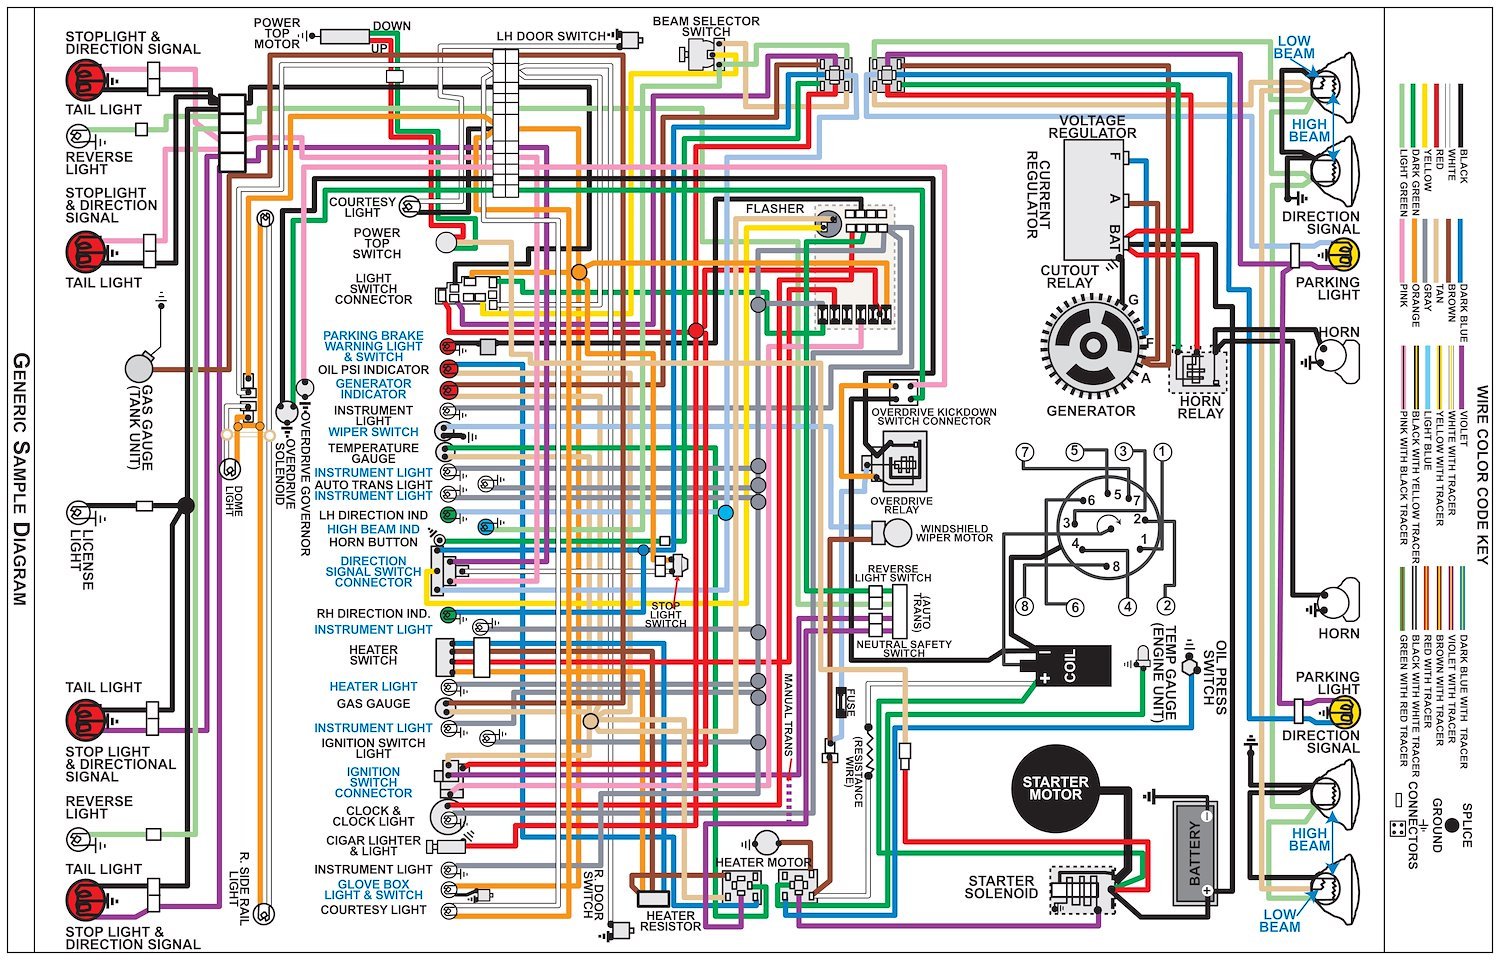 Wiring Diagram for 1970 Pontiac Full Size Cars, 11 in. x 17 in., Laminated